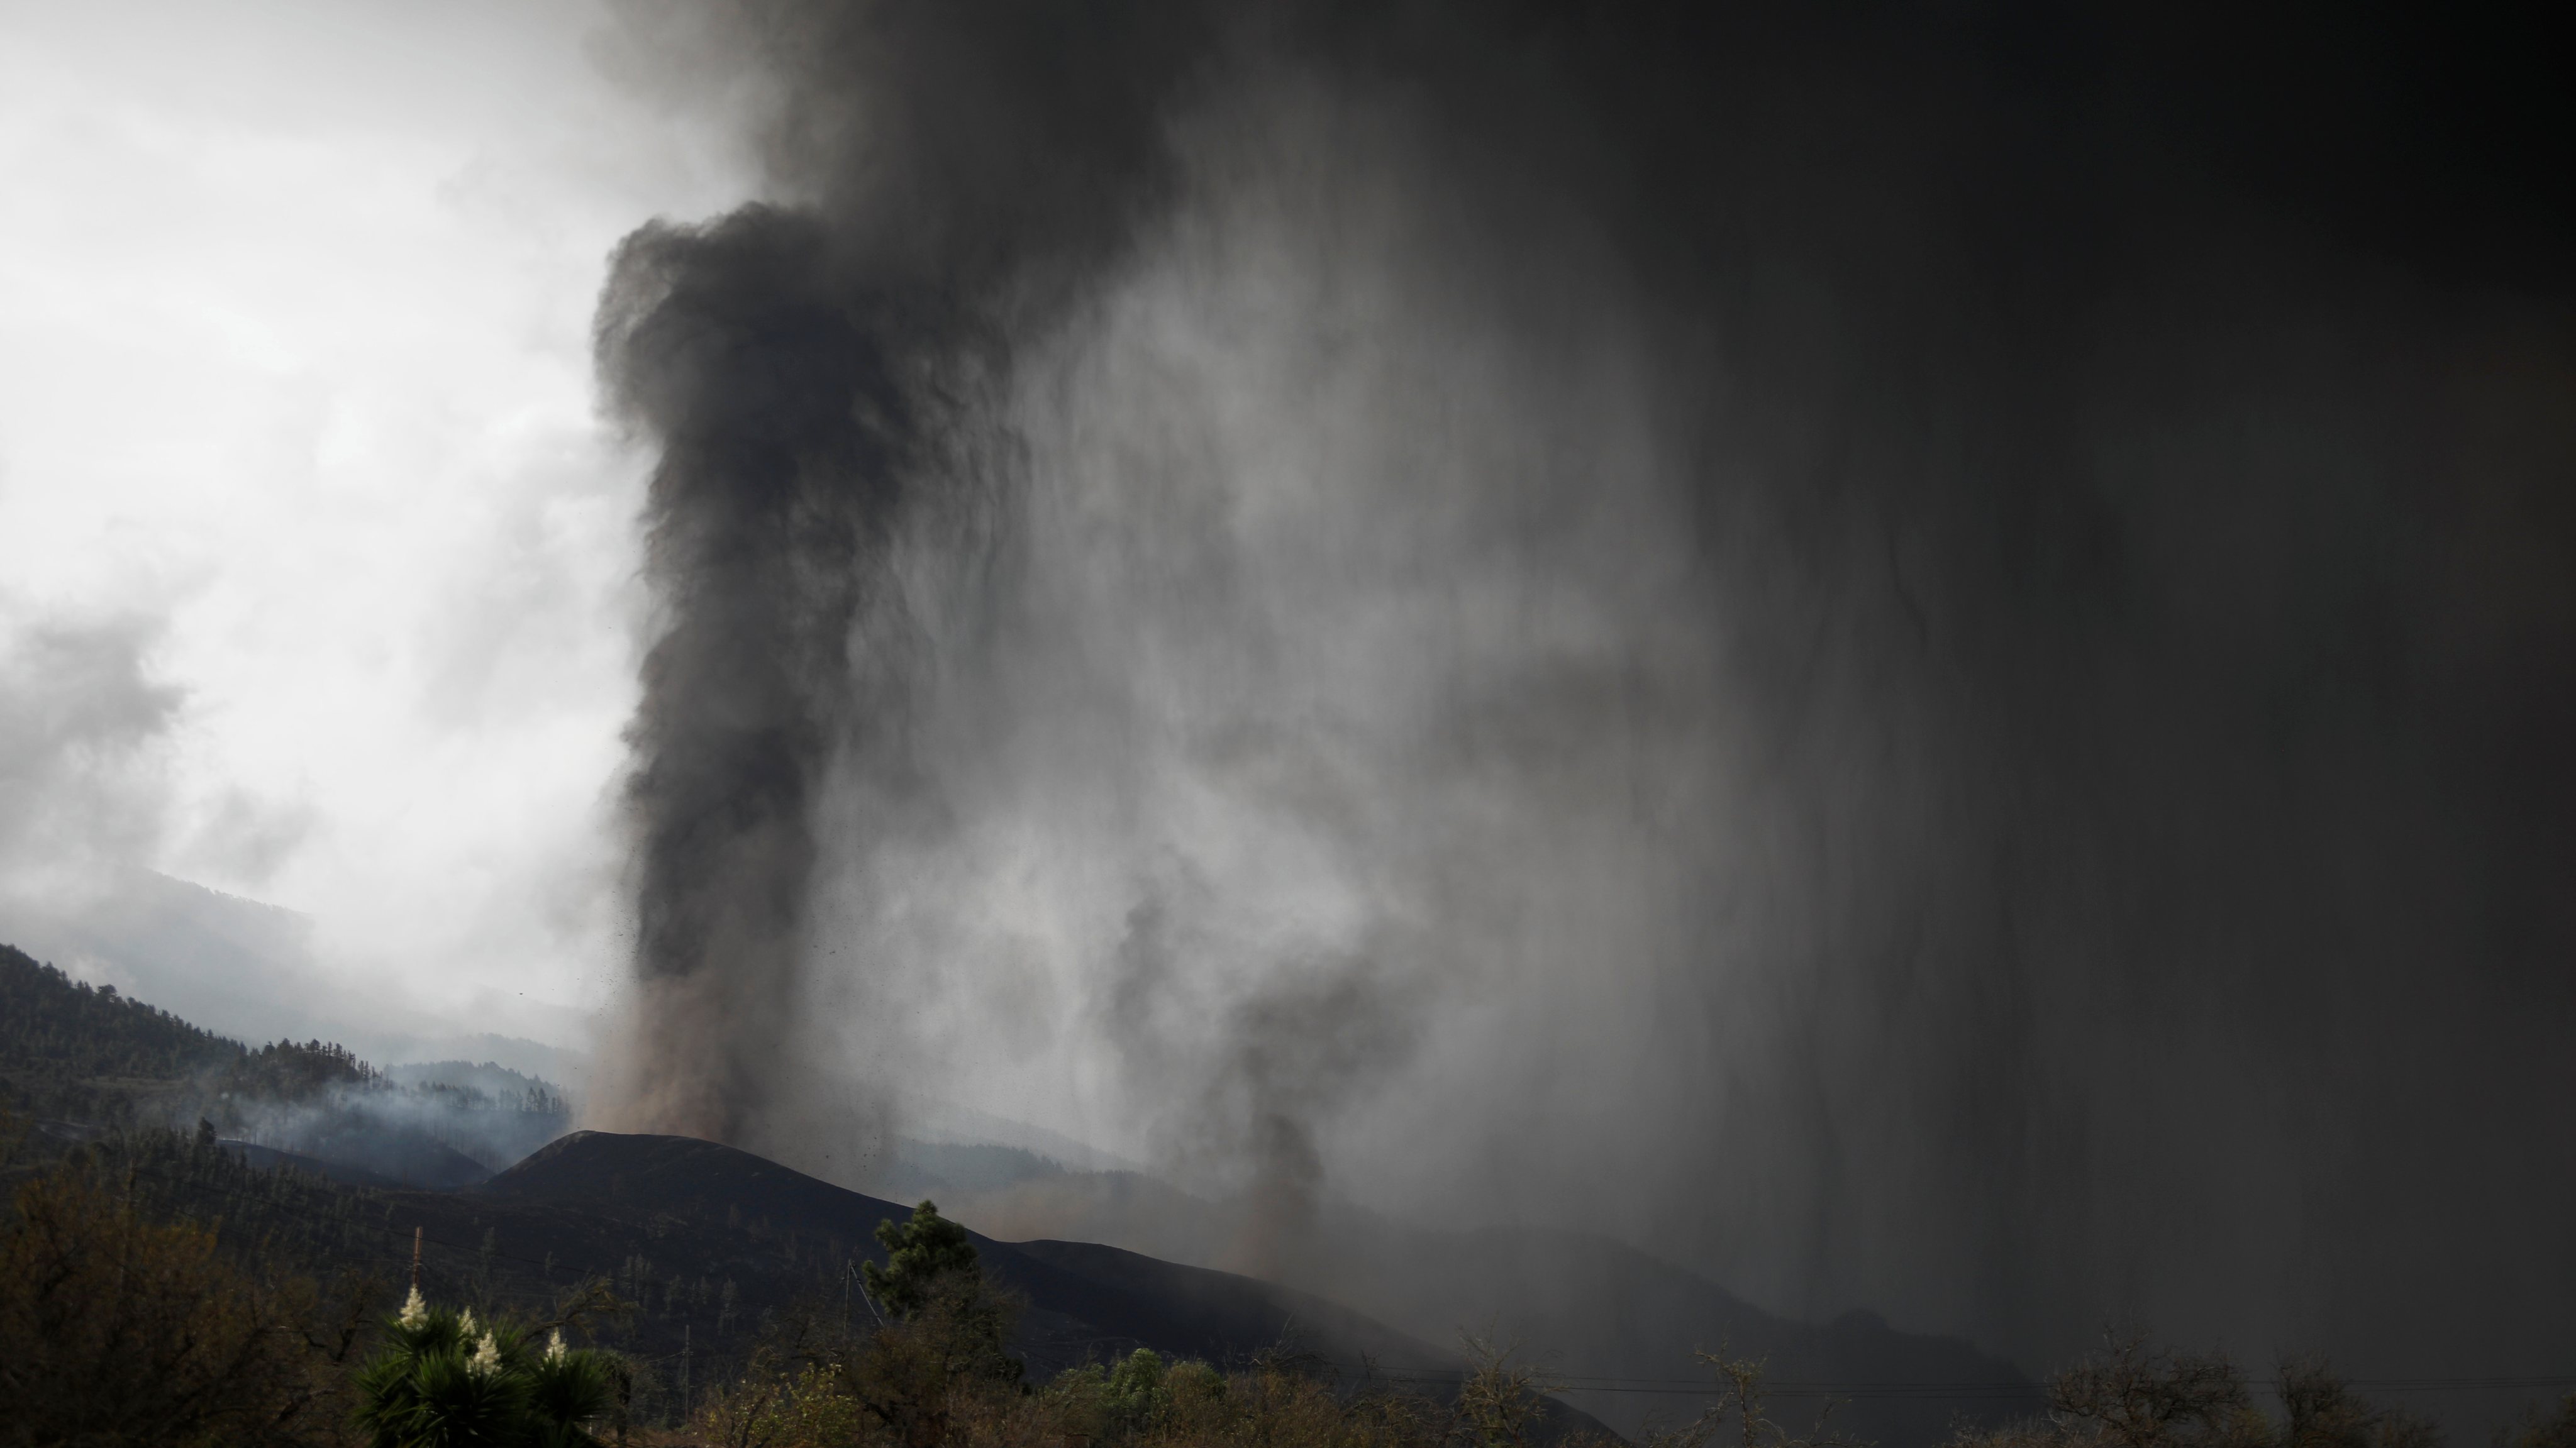 The Cloud Of Ash And Sulfur Dioxide Expelled By The Volcano Could Reach The Peninsula On Thursday